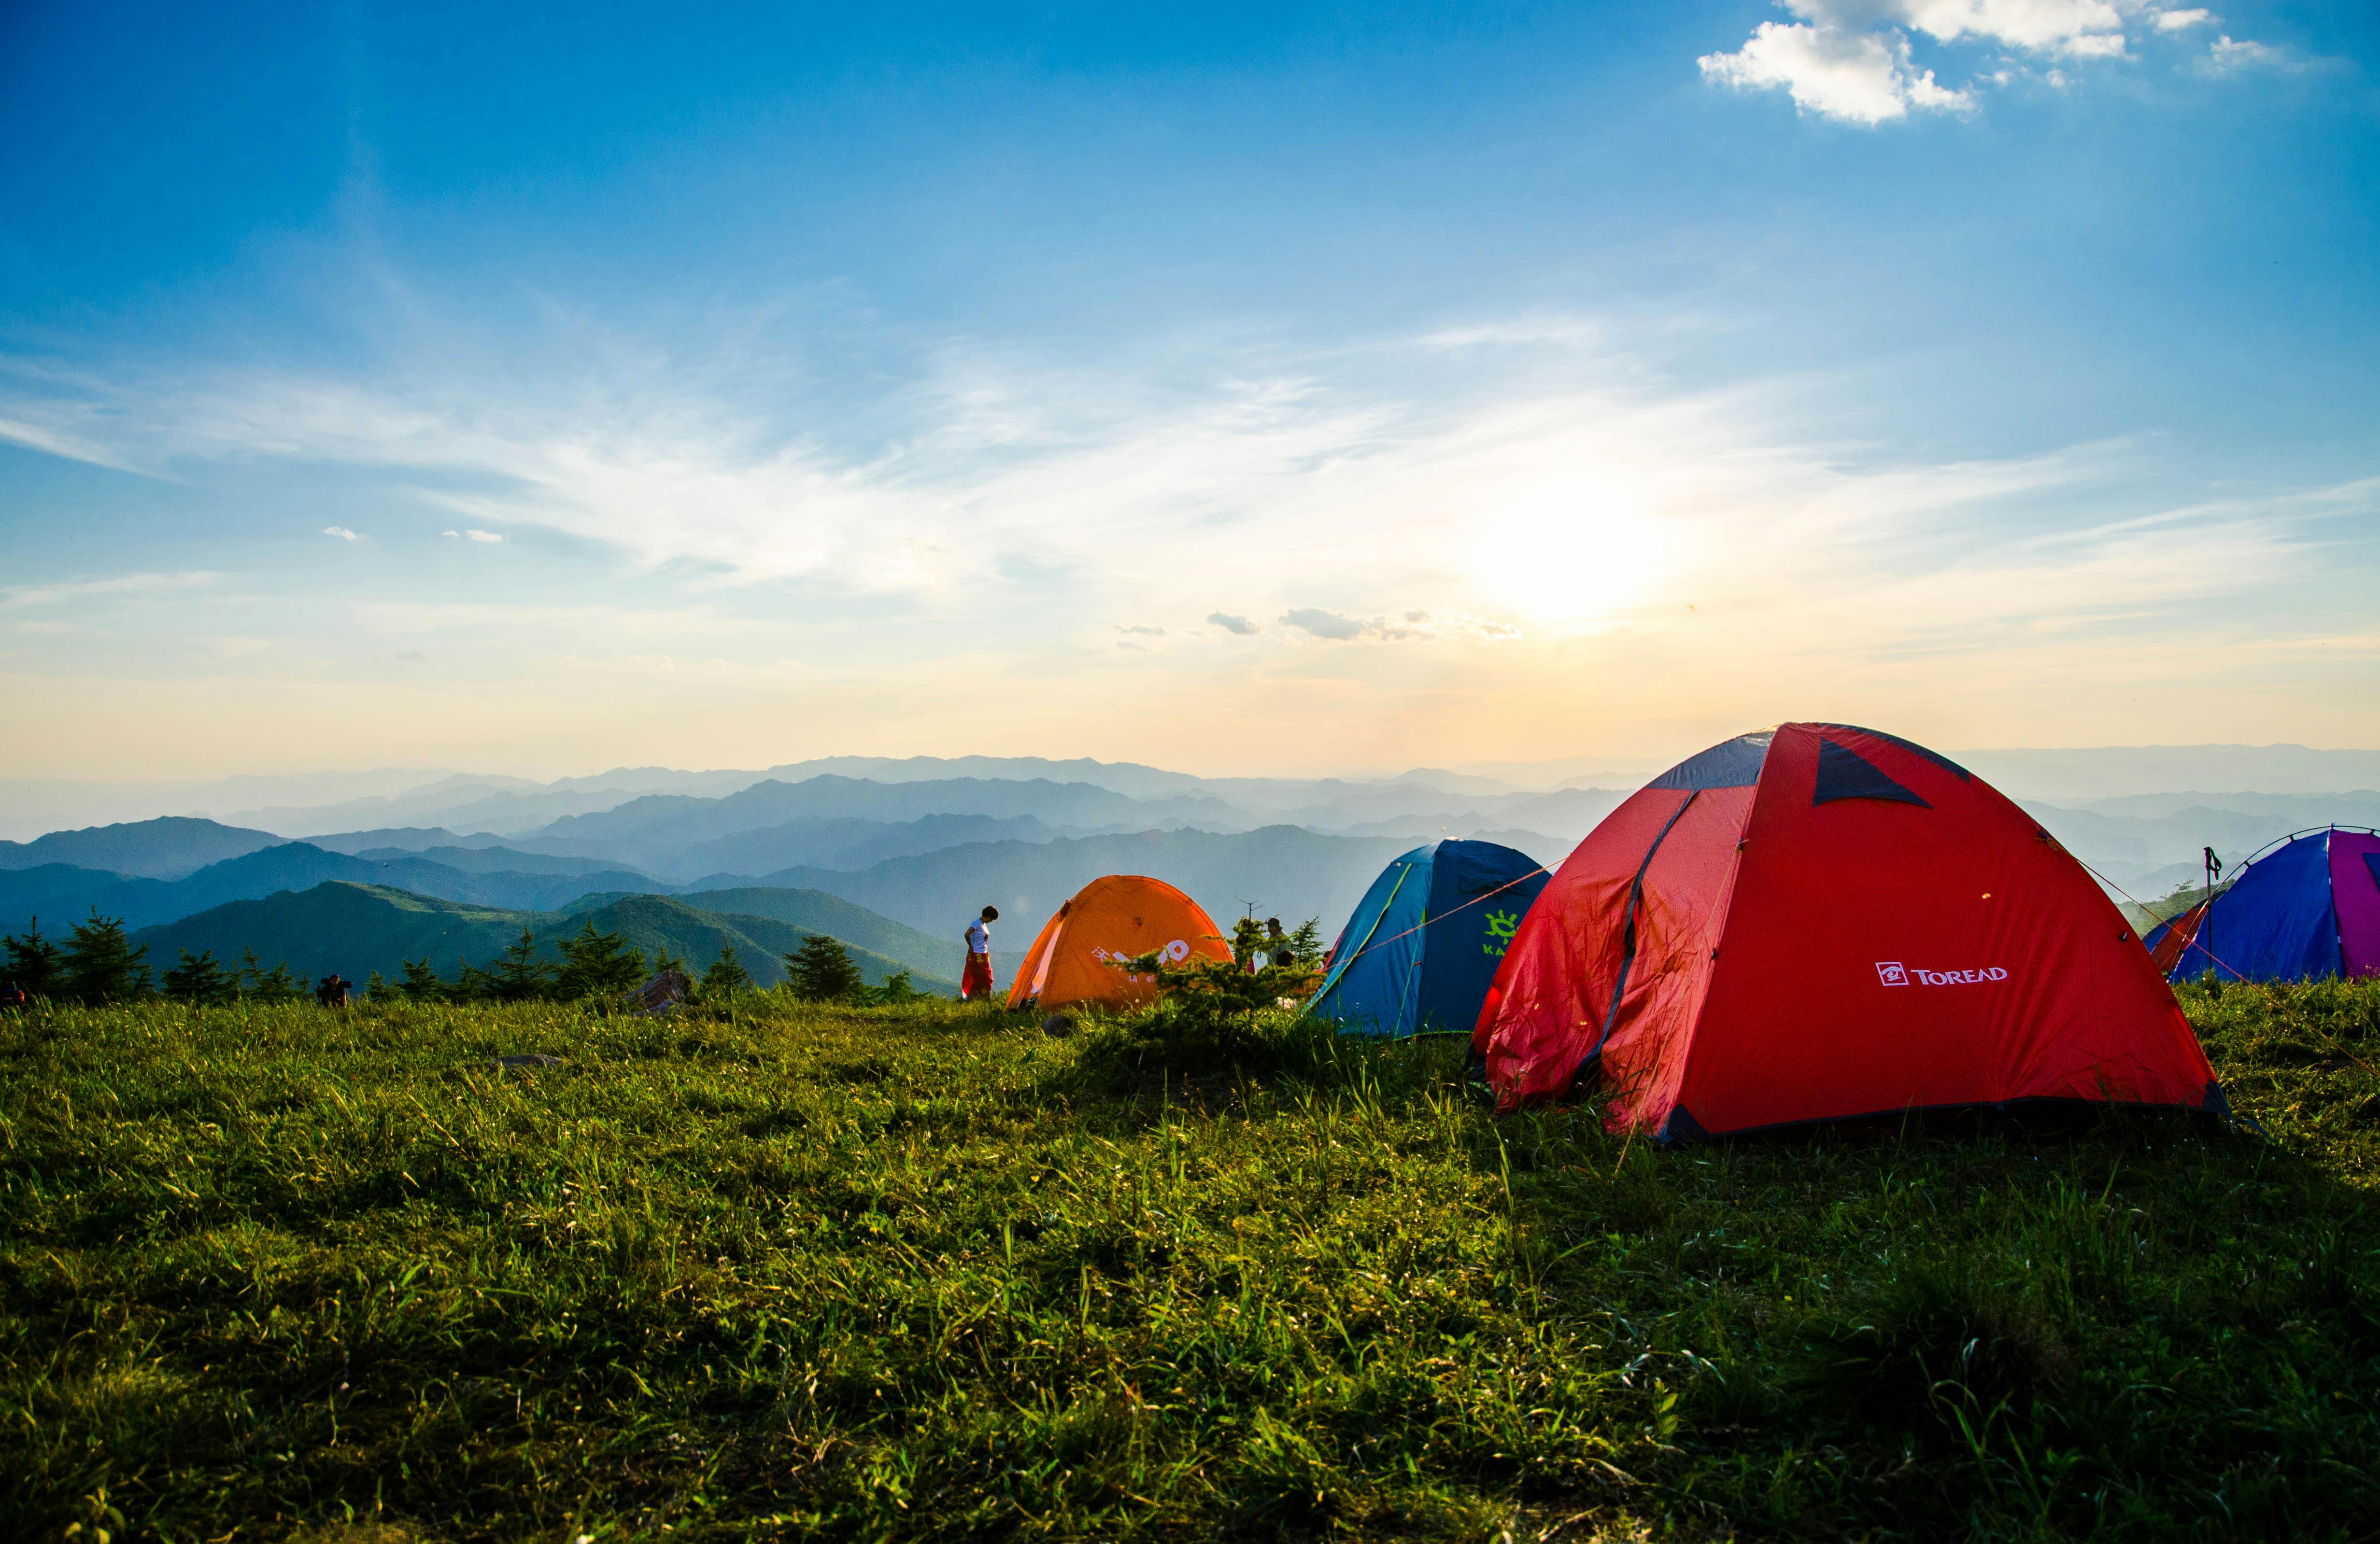 Free Photo of Pitched Dome Tents Overlooking Mountain Ranges Stock Photo